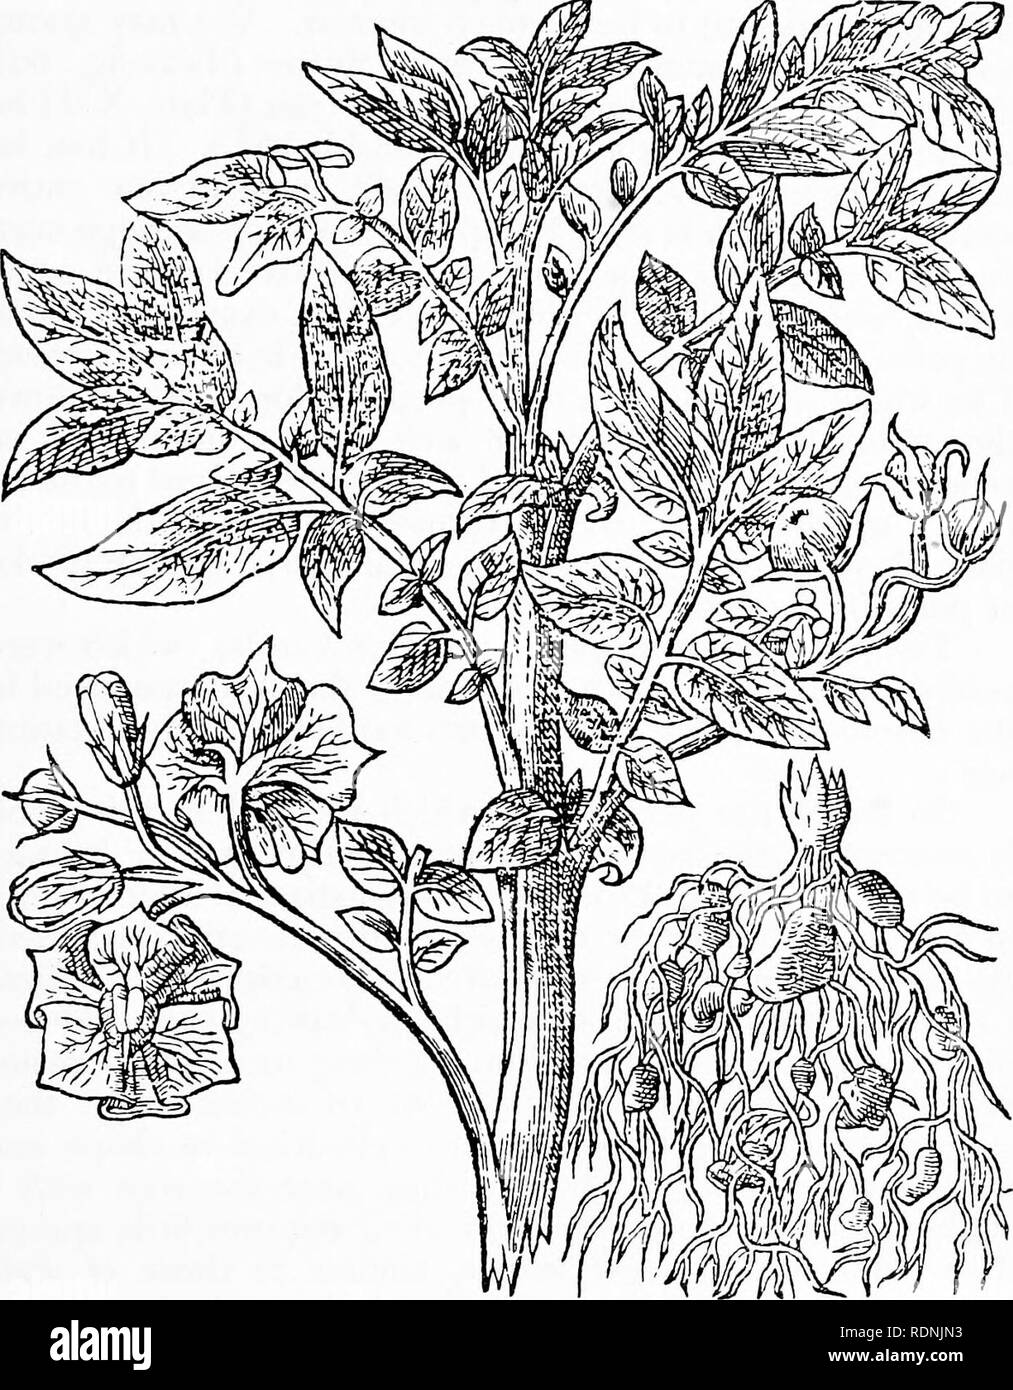 . Herbals, their origin and evolution, a chapter in the history of botany, 1470-1670. Botany; Botany; Herbals. V] De r Ecluse 129 inclines to a dark colour, and is speckled as in Tithymalus characia : the speckles are simply the remains of leaves which have fallen off. Meanwhile a thick pedicel covered. Text-fig. 60. &quot;Battata VirgmULna.&quot; = Soianum tuberostim L., Potato [Gerard, The Herball, 1597]. with leaves springs out from the top of the larger branches, and bears, so to speak, a thyrsus of many yellow flowers,. Please note that these images are extracted from scanned page images  Stock Photo